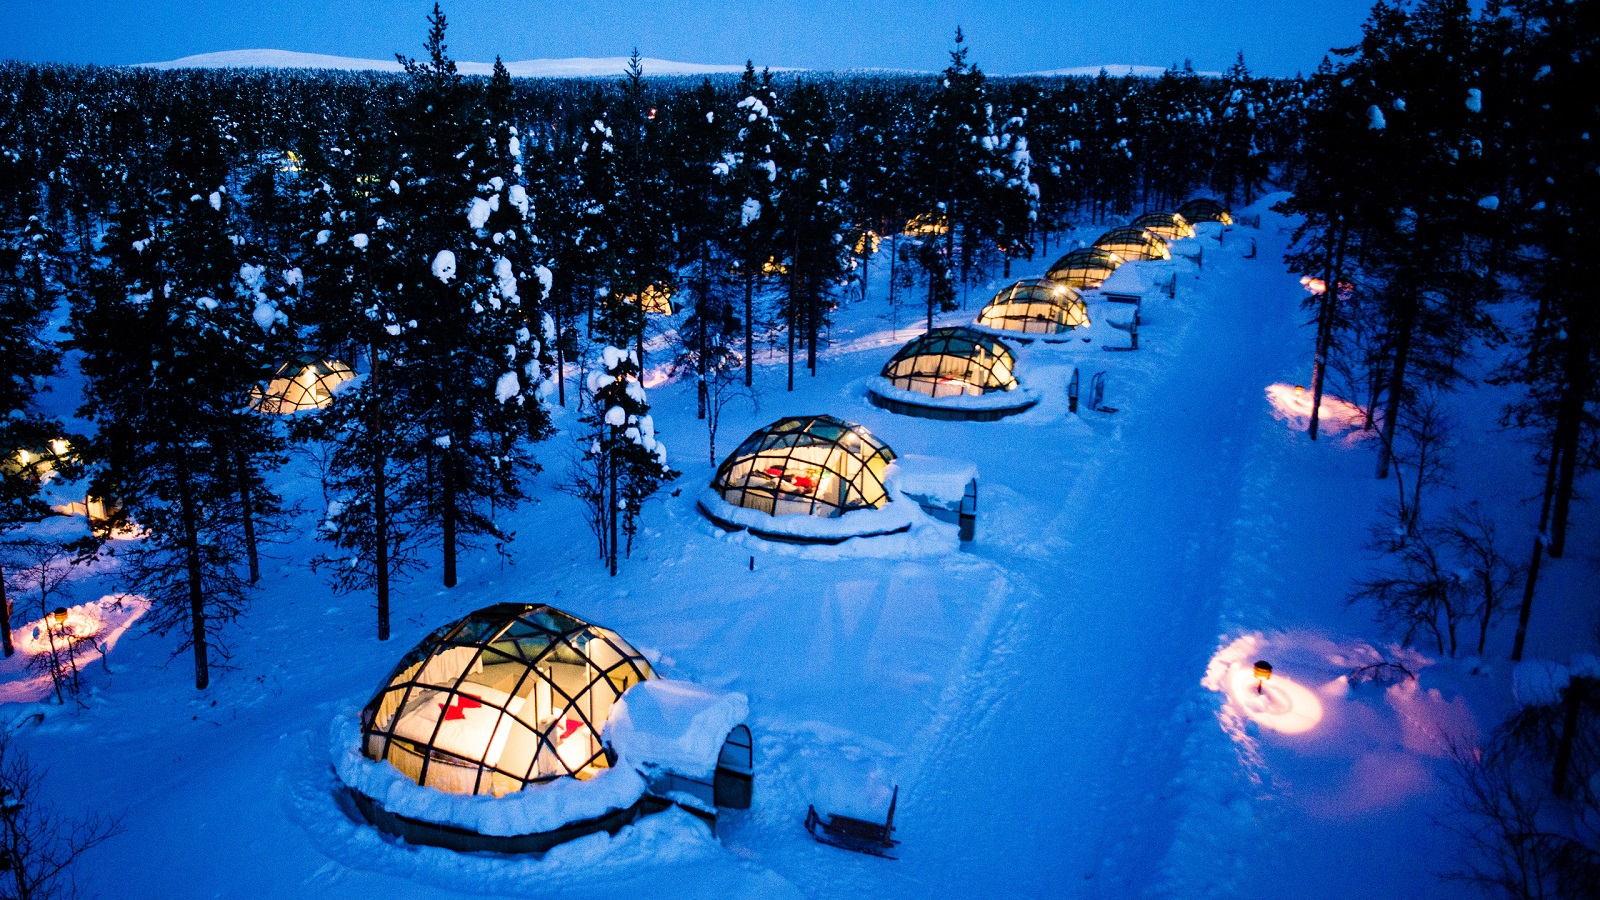 Coolest place to stay and see the Northern Lights